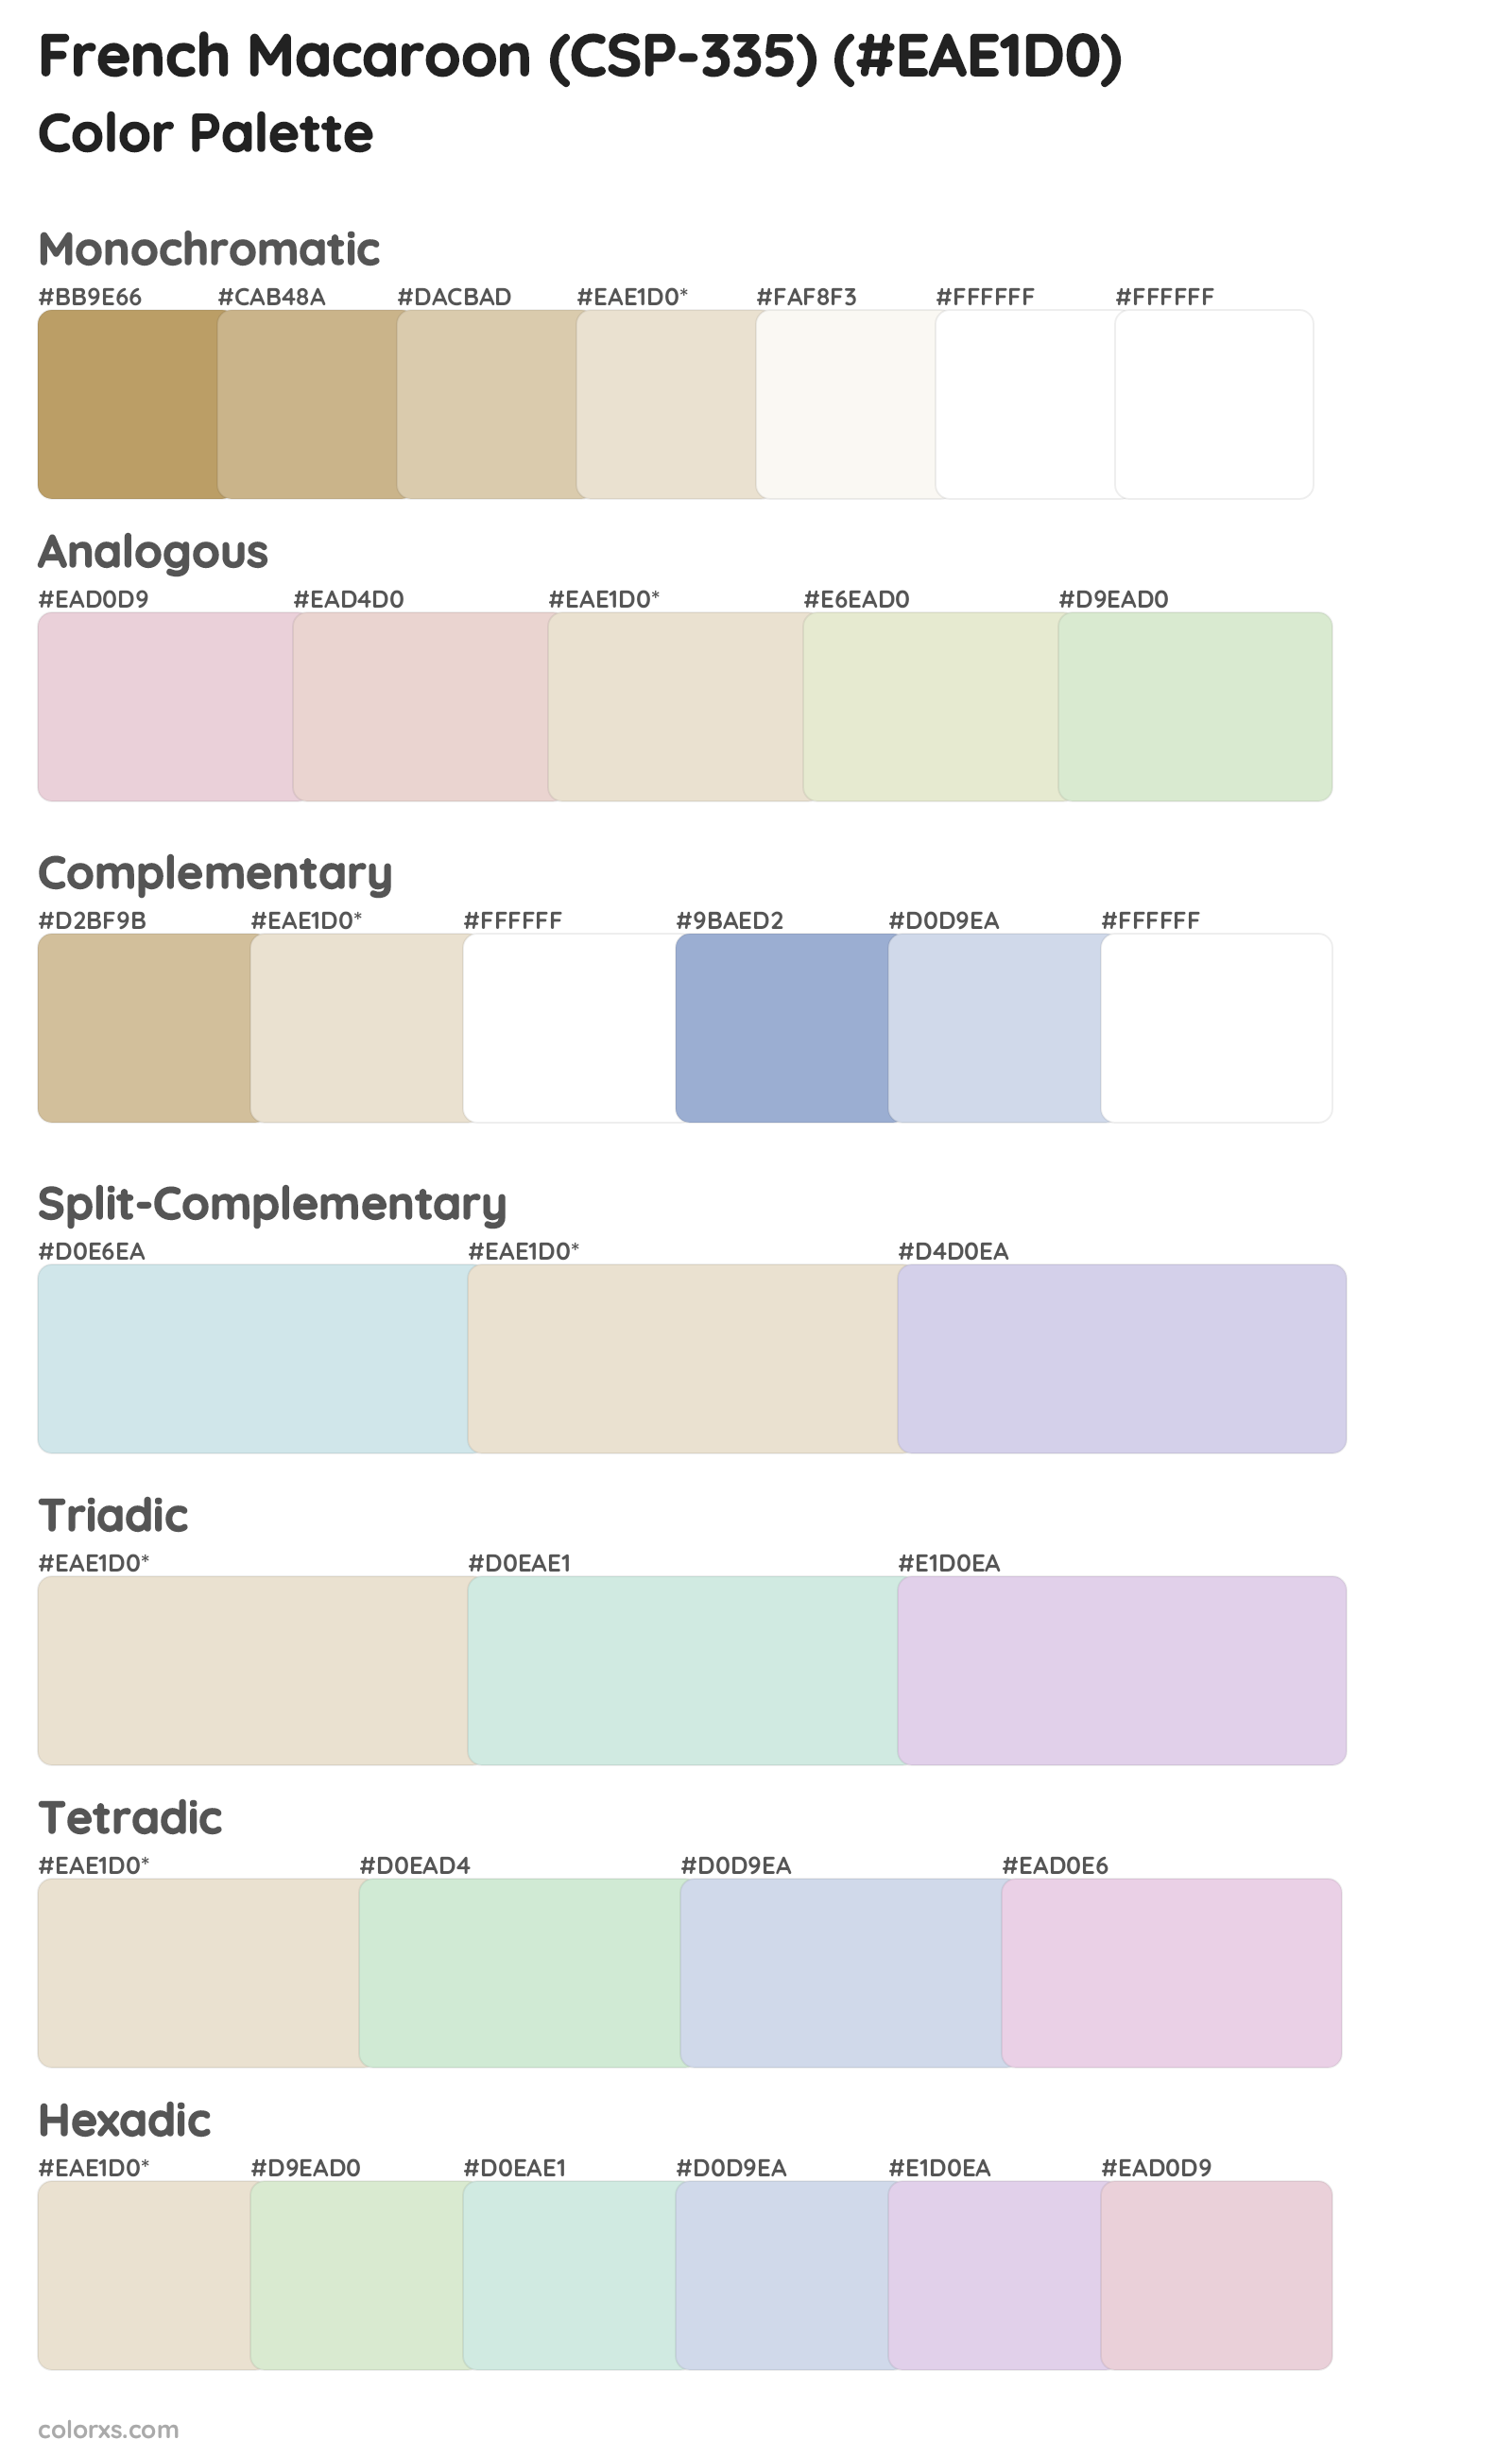 French Macaroon (CSP-335) Color Scheme Palettes